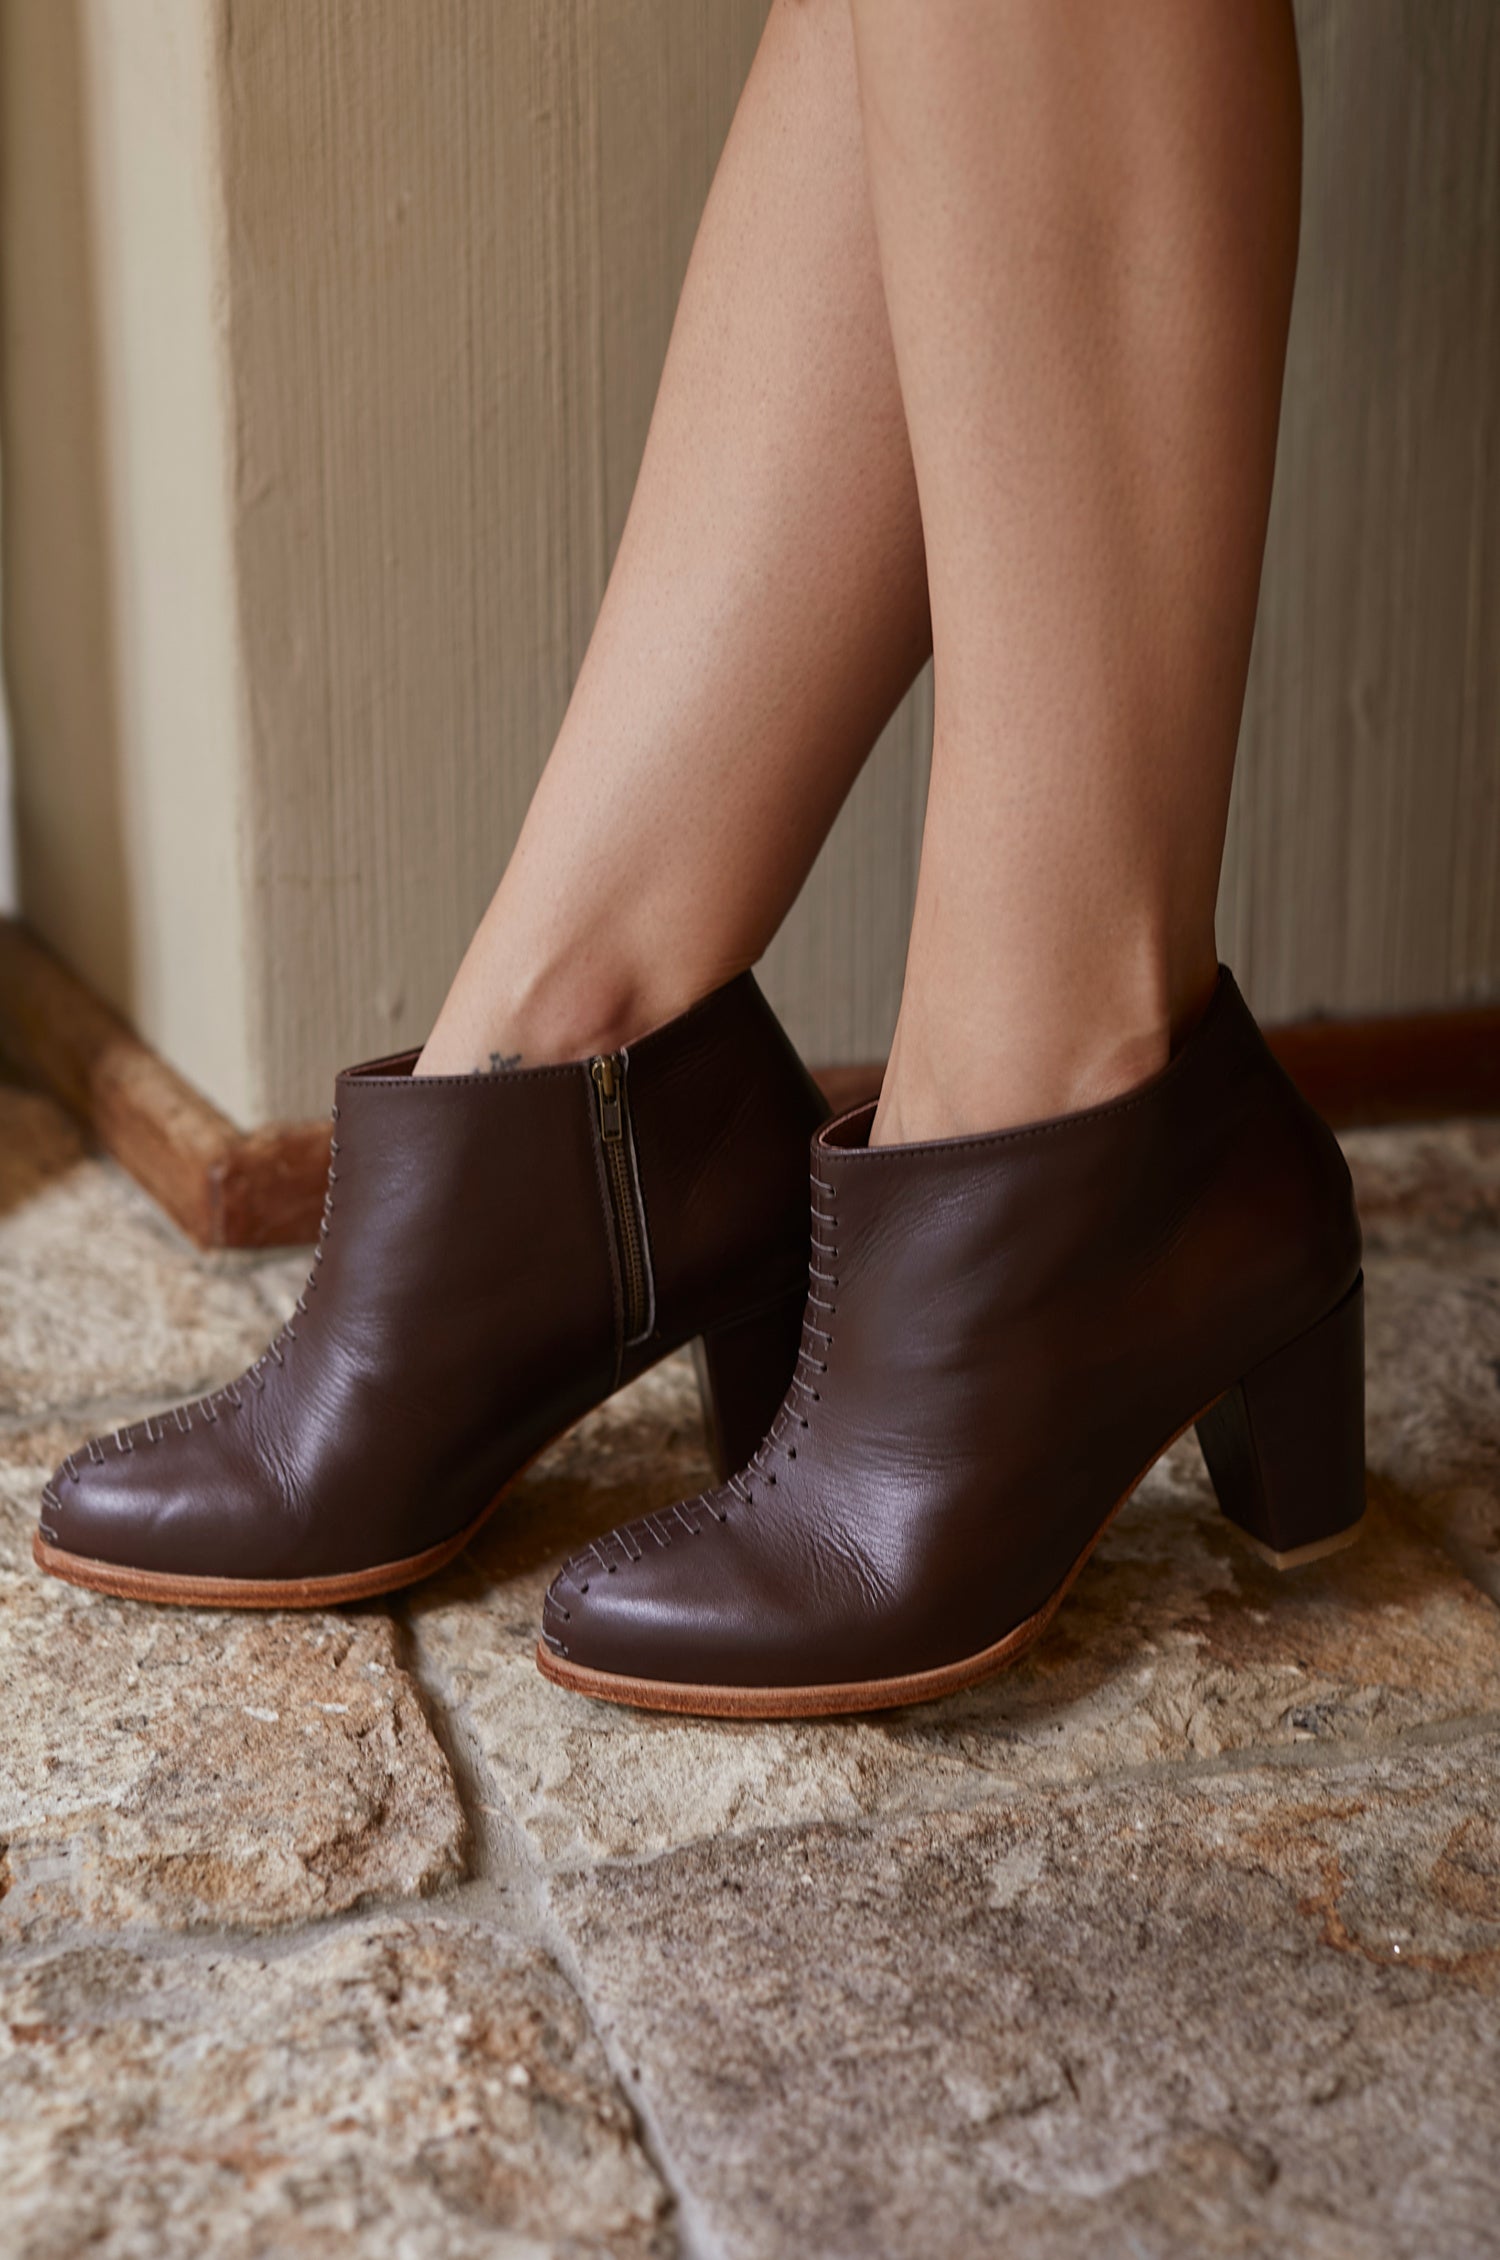 Monte Carlo Leather Booties in Dark Brown